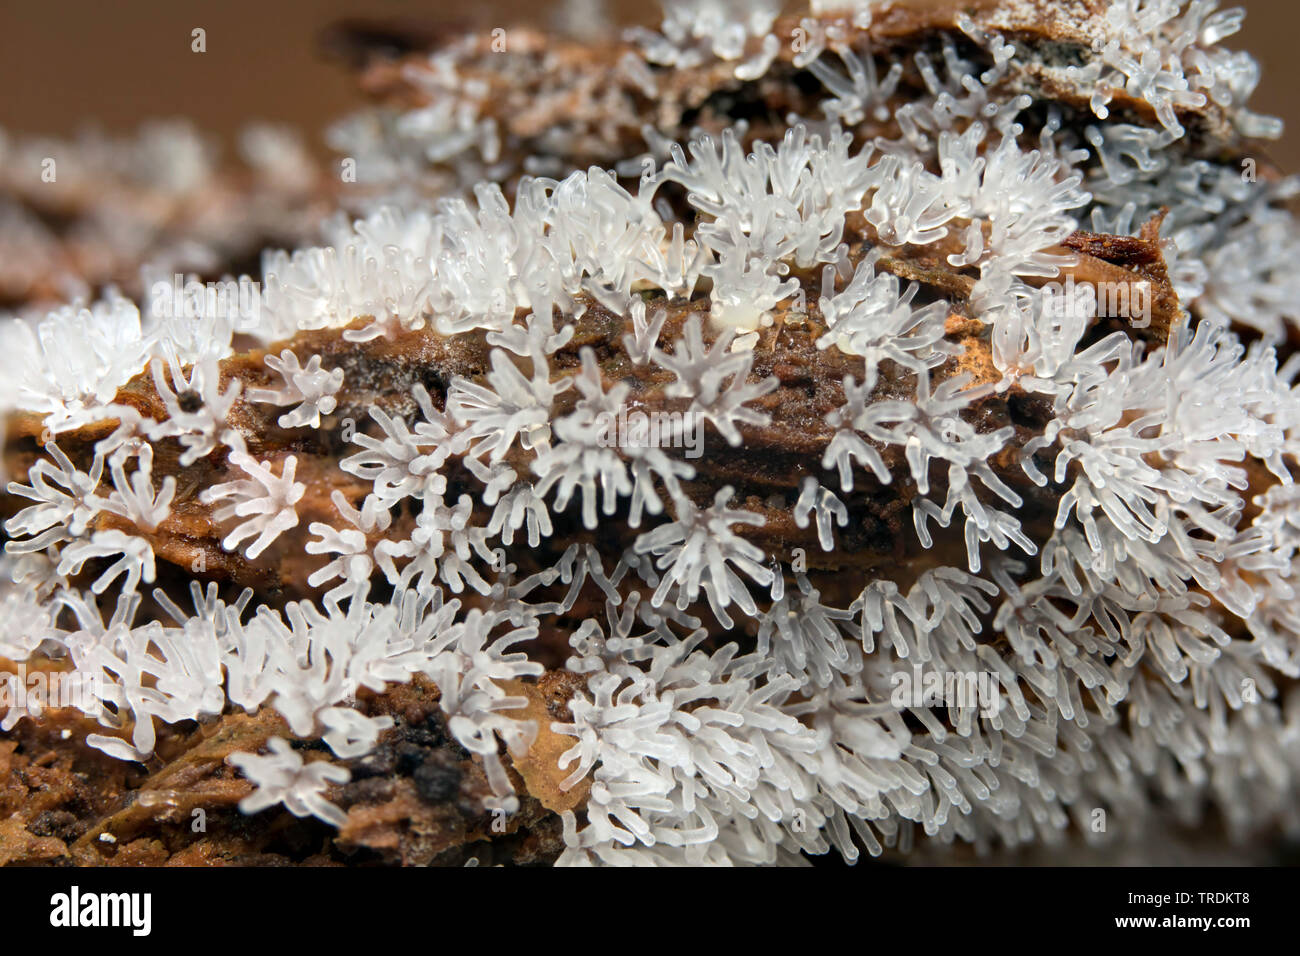 Coral slime mold (Ceratiomyxa fruticulosa), on dead wood, Netherlands, Northern Netherlands Stock Photo